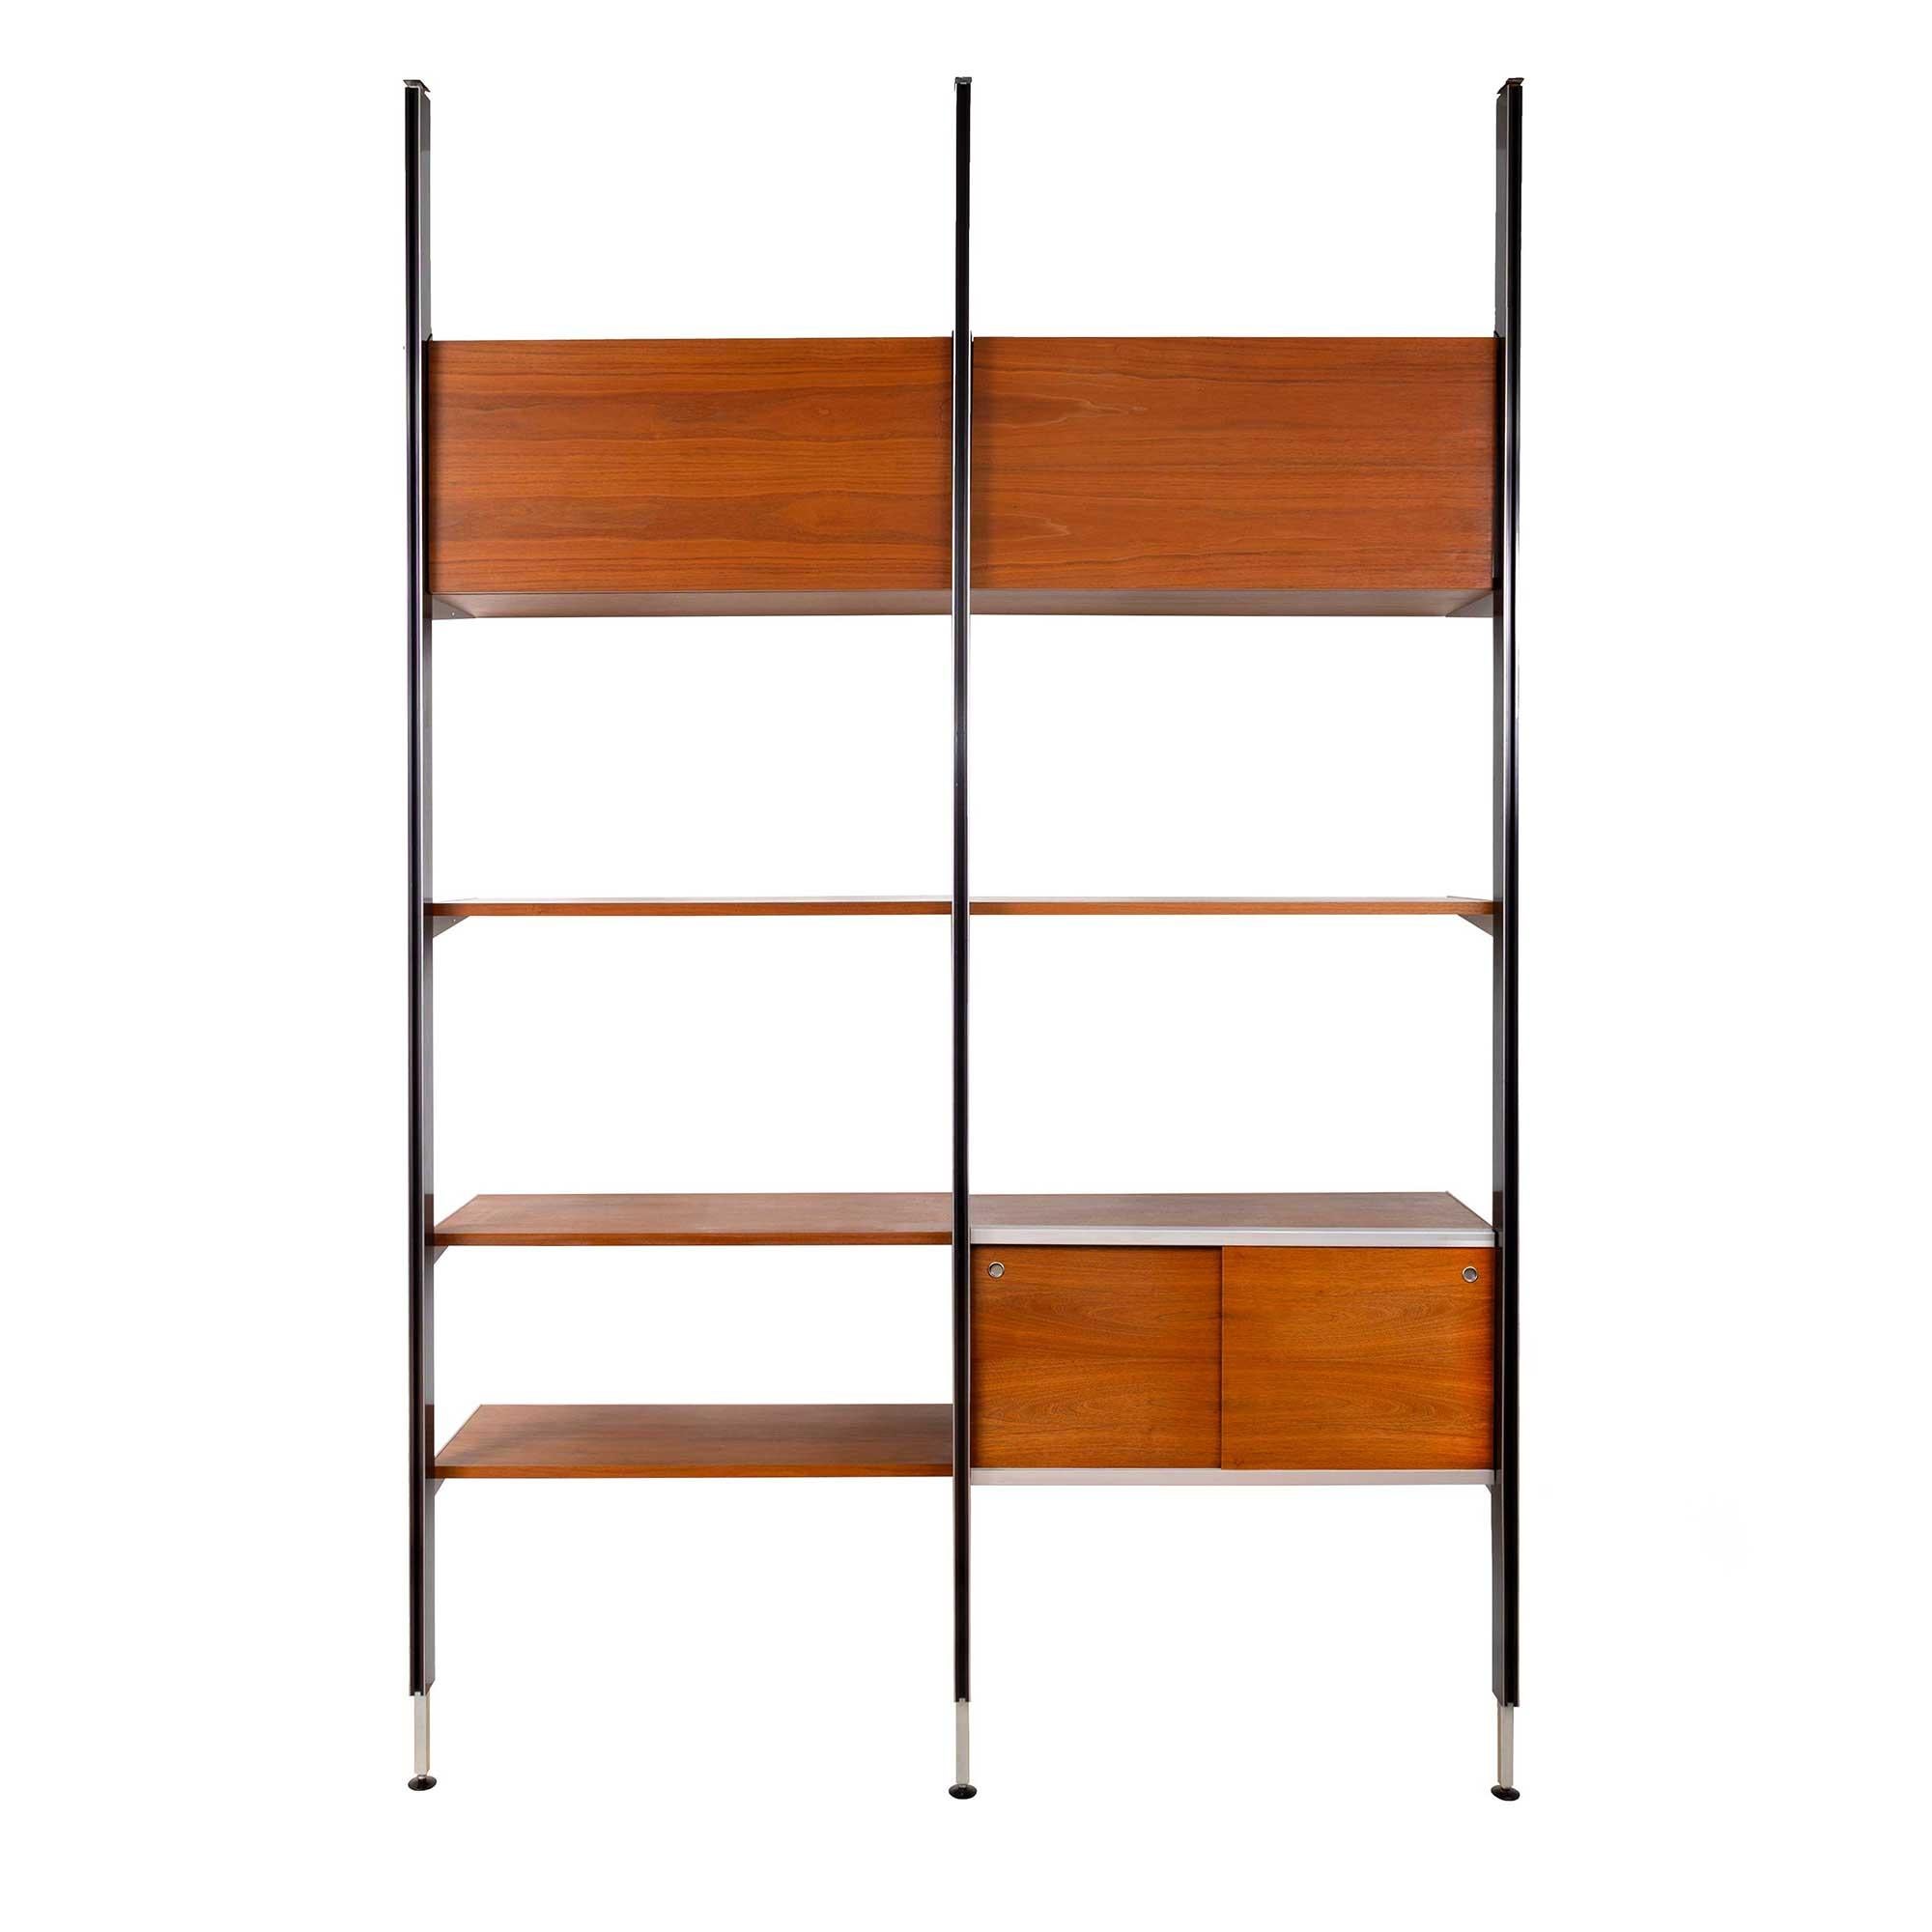 George Nelson CSS Book Shelve System Circa 1960s for Herman Miller For Sale